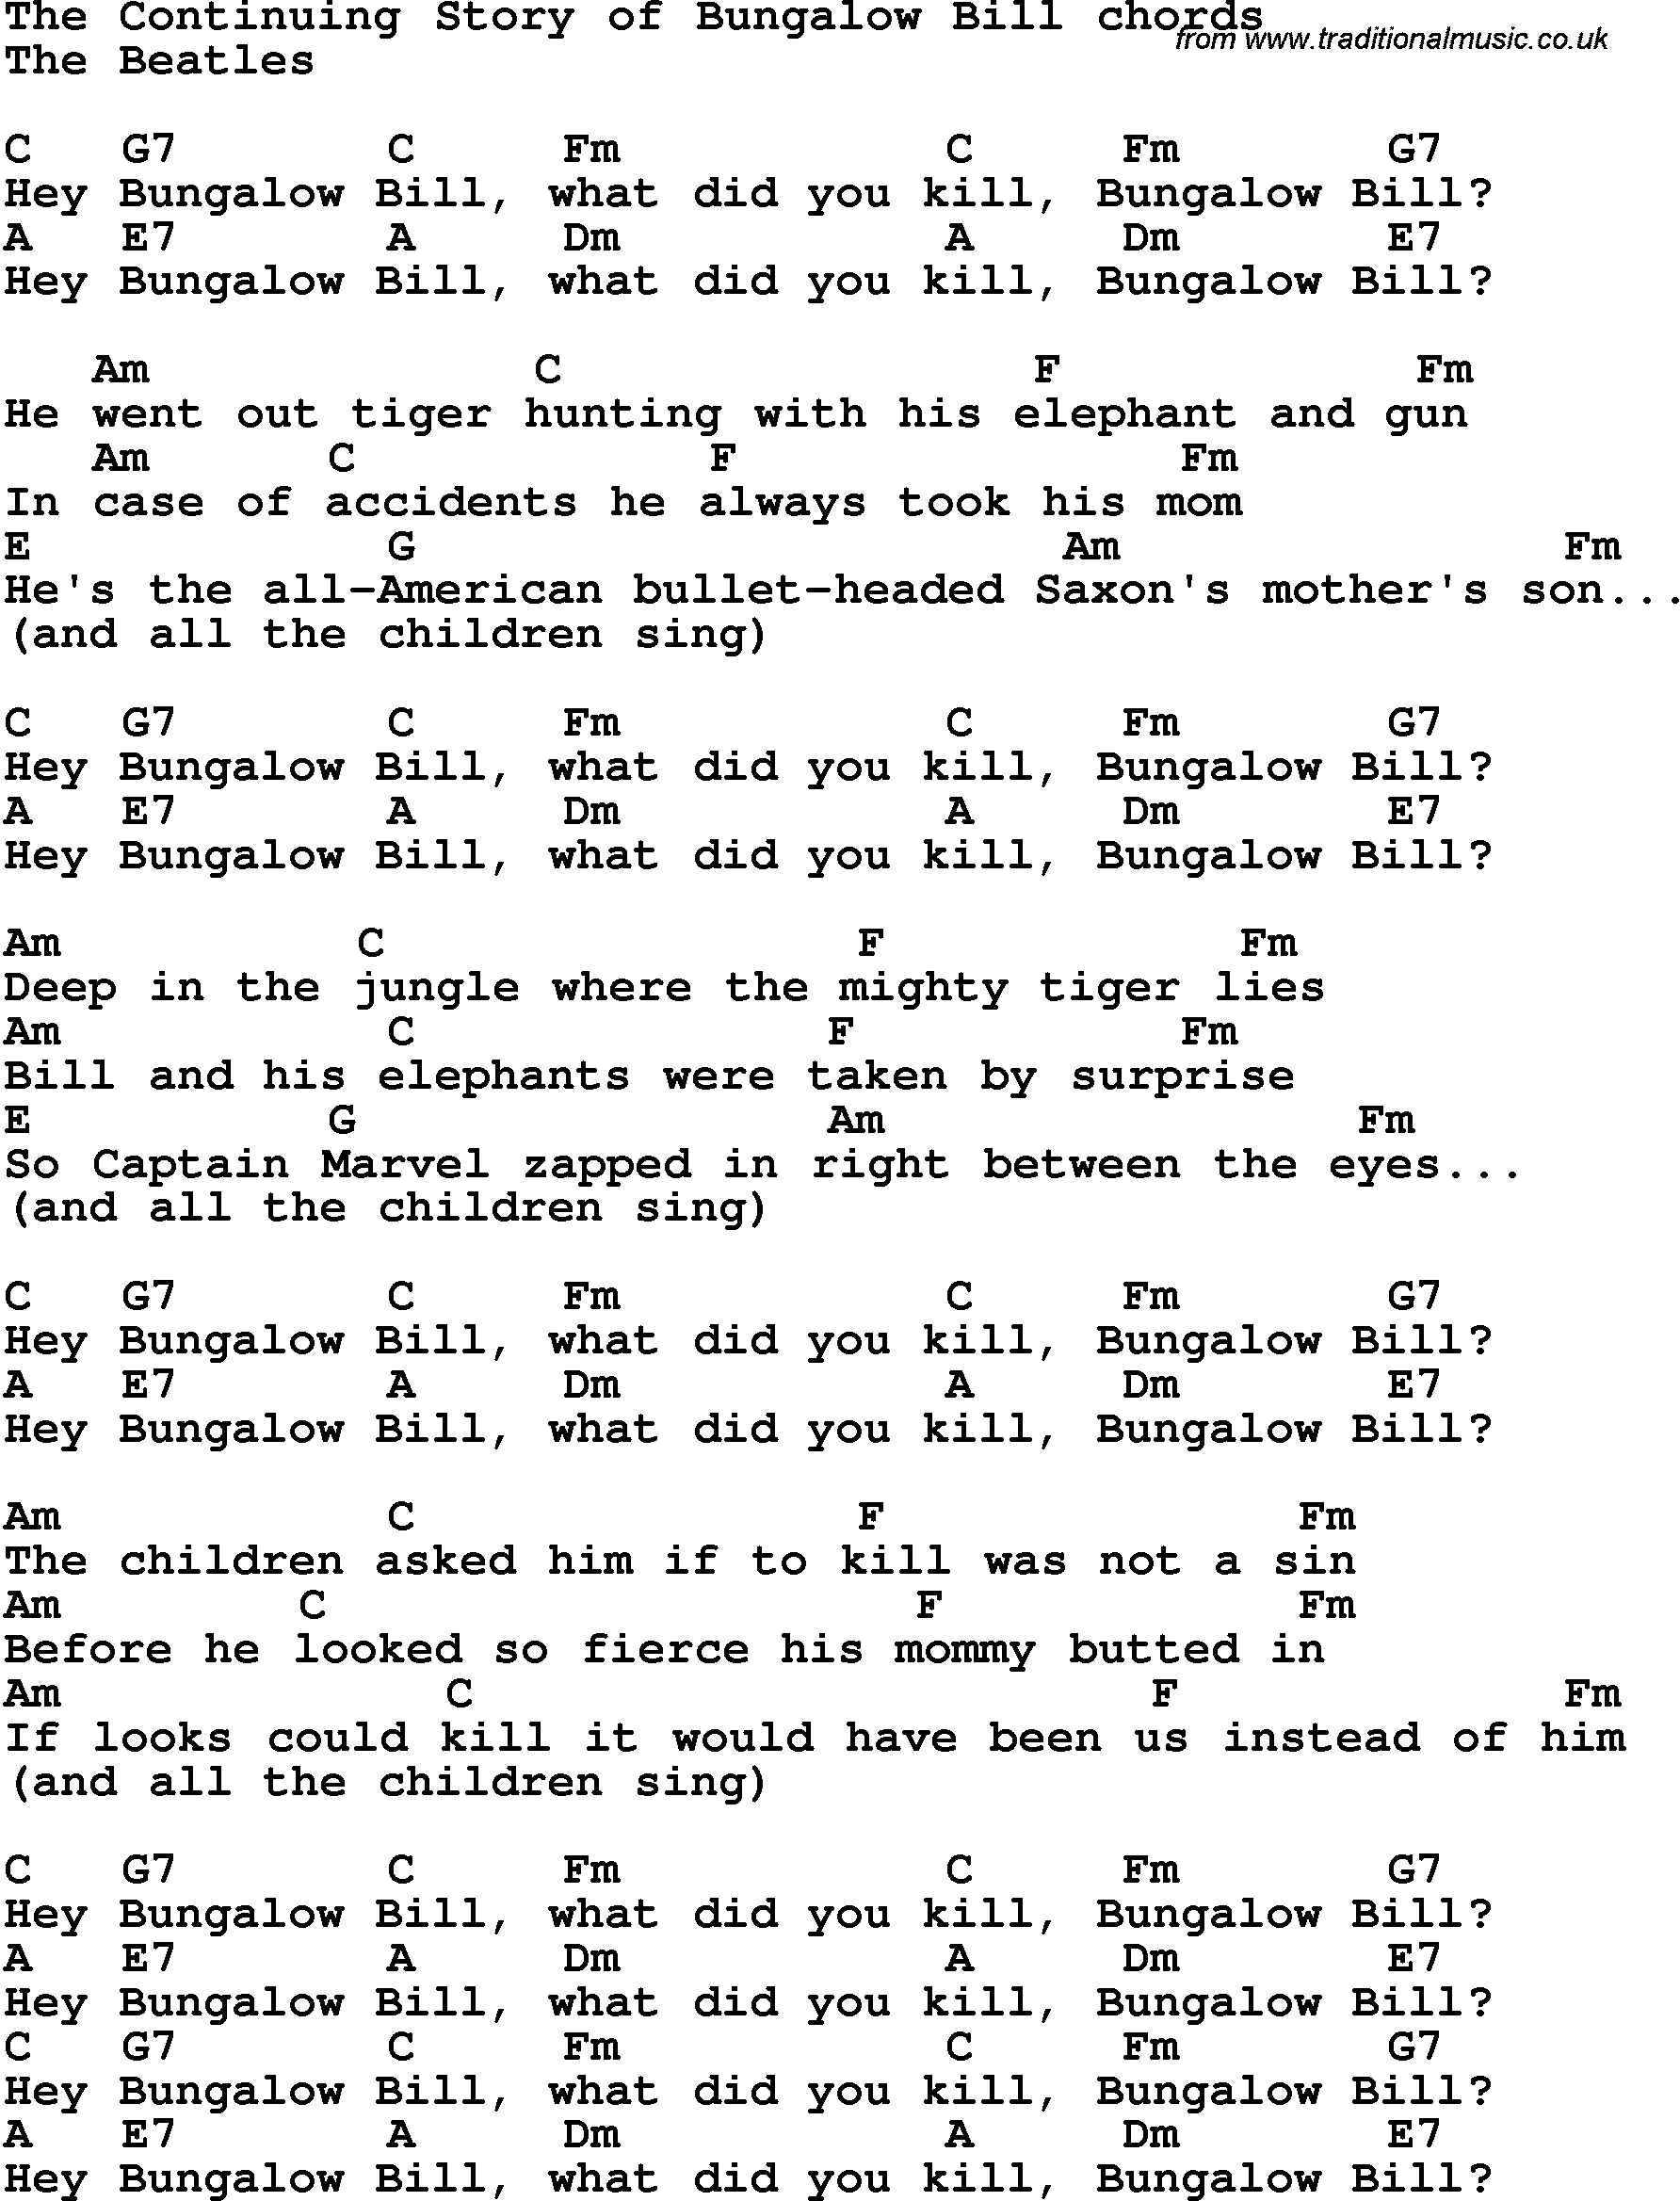 Song Lyrics with guitar chords for Continuing Story Of Bungalow Bill